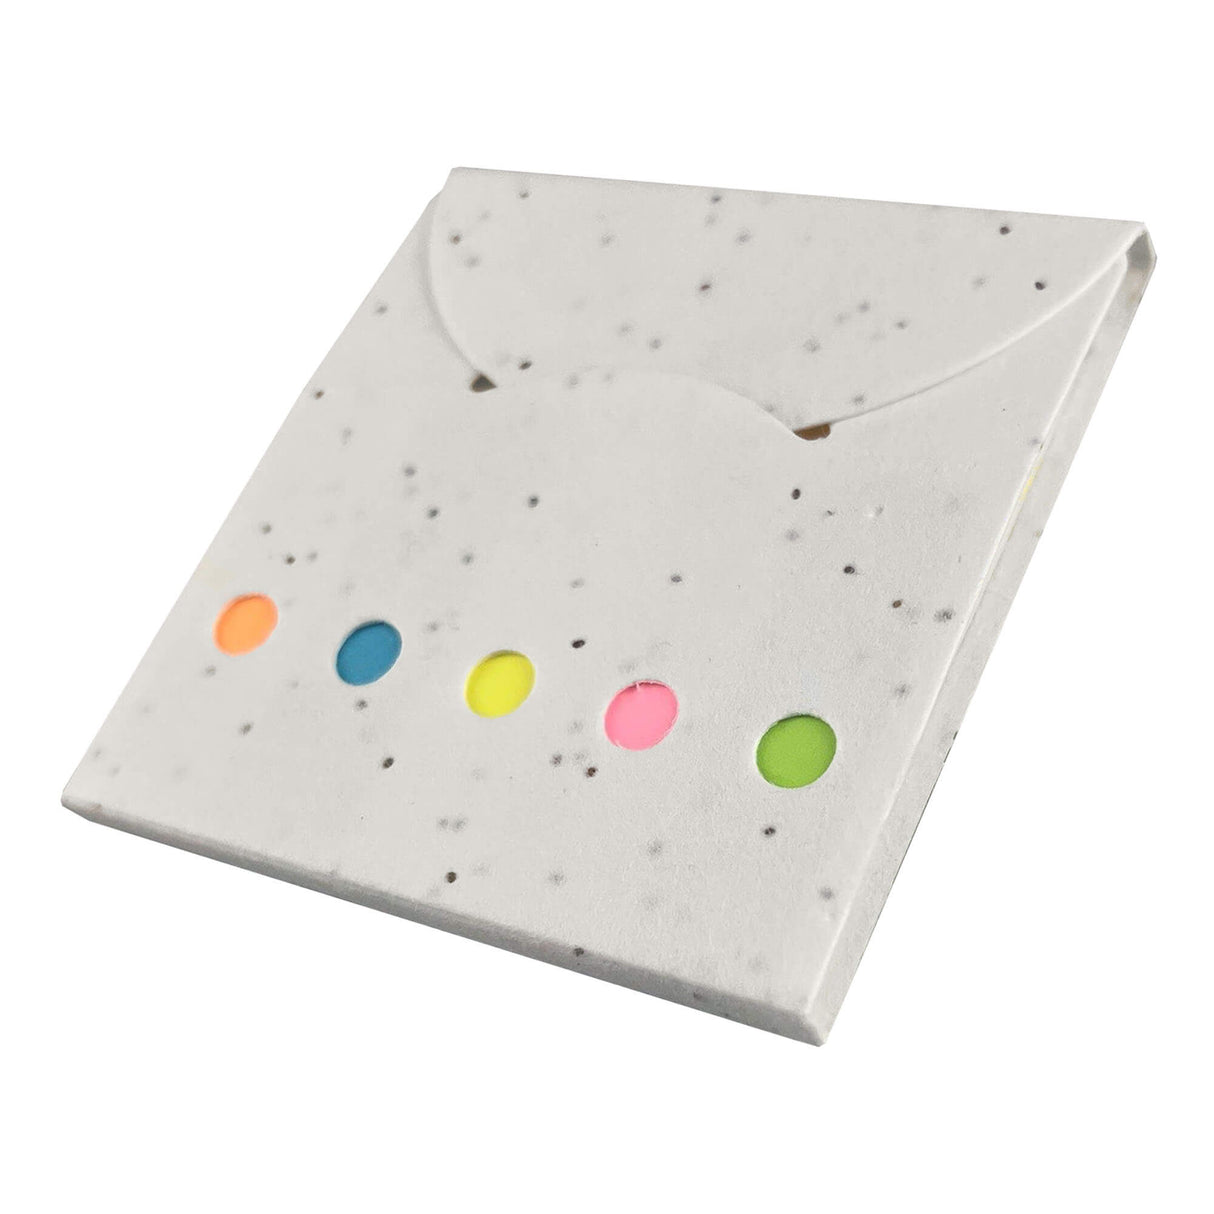 Daisy Seed Sticky Note Pad - Printed